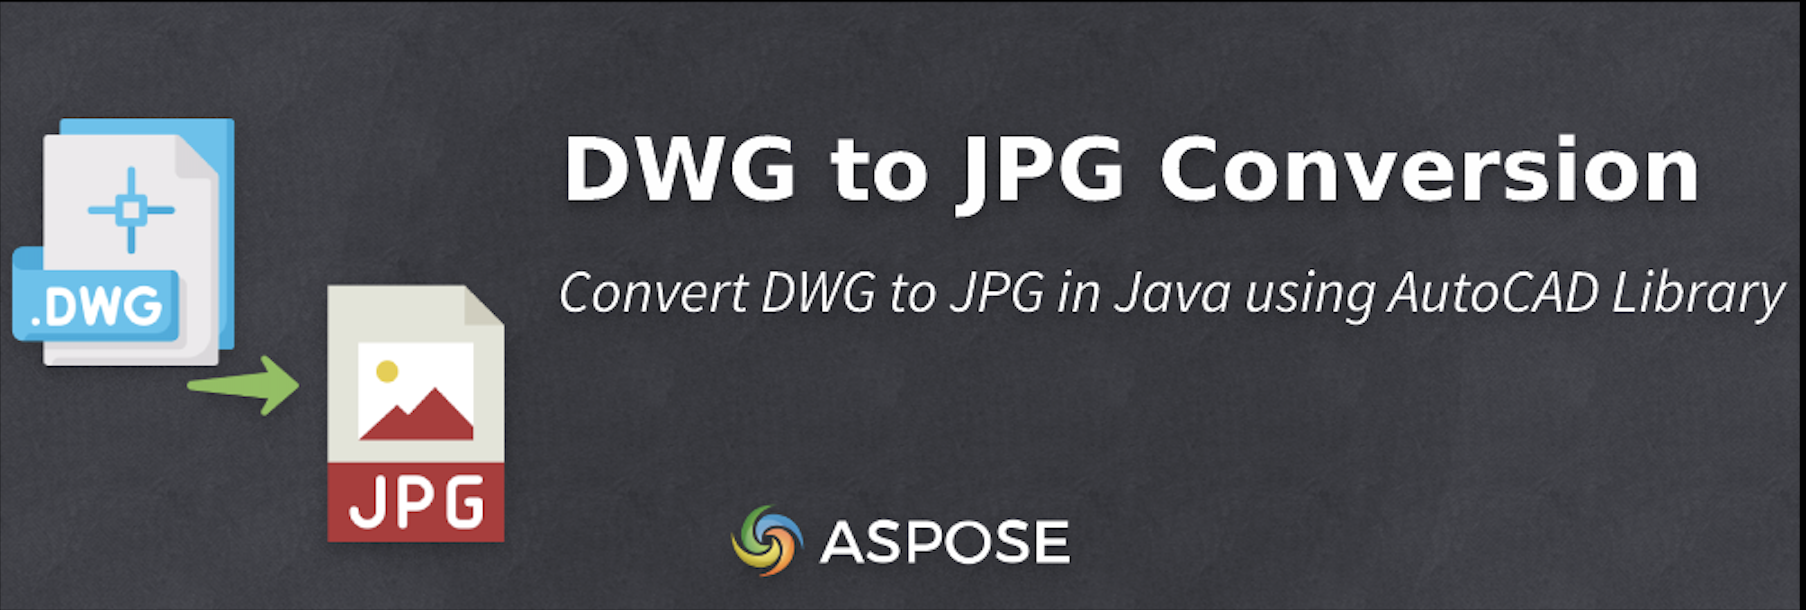 Convert DWG to JPG in Java using AutoCAD Library